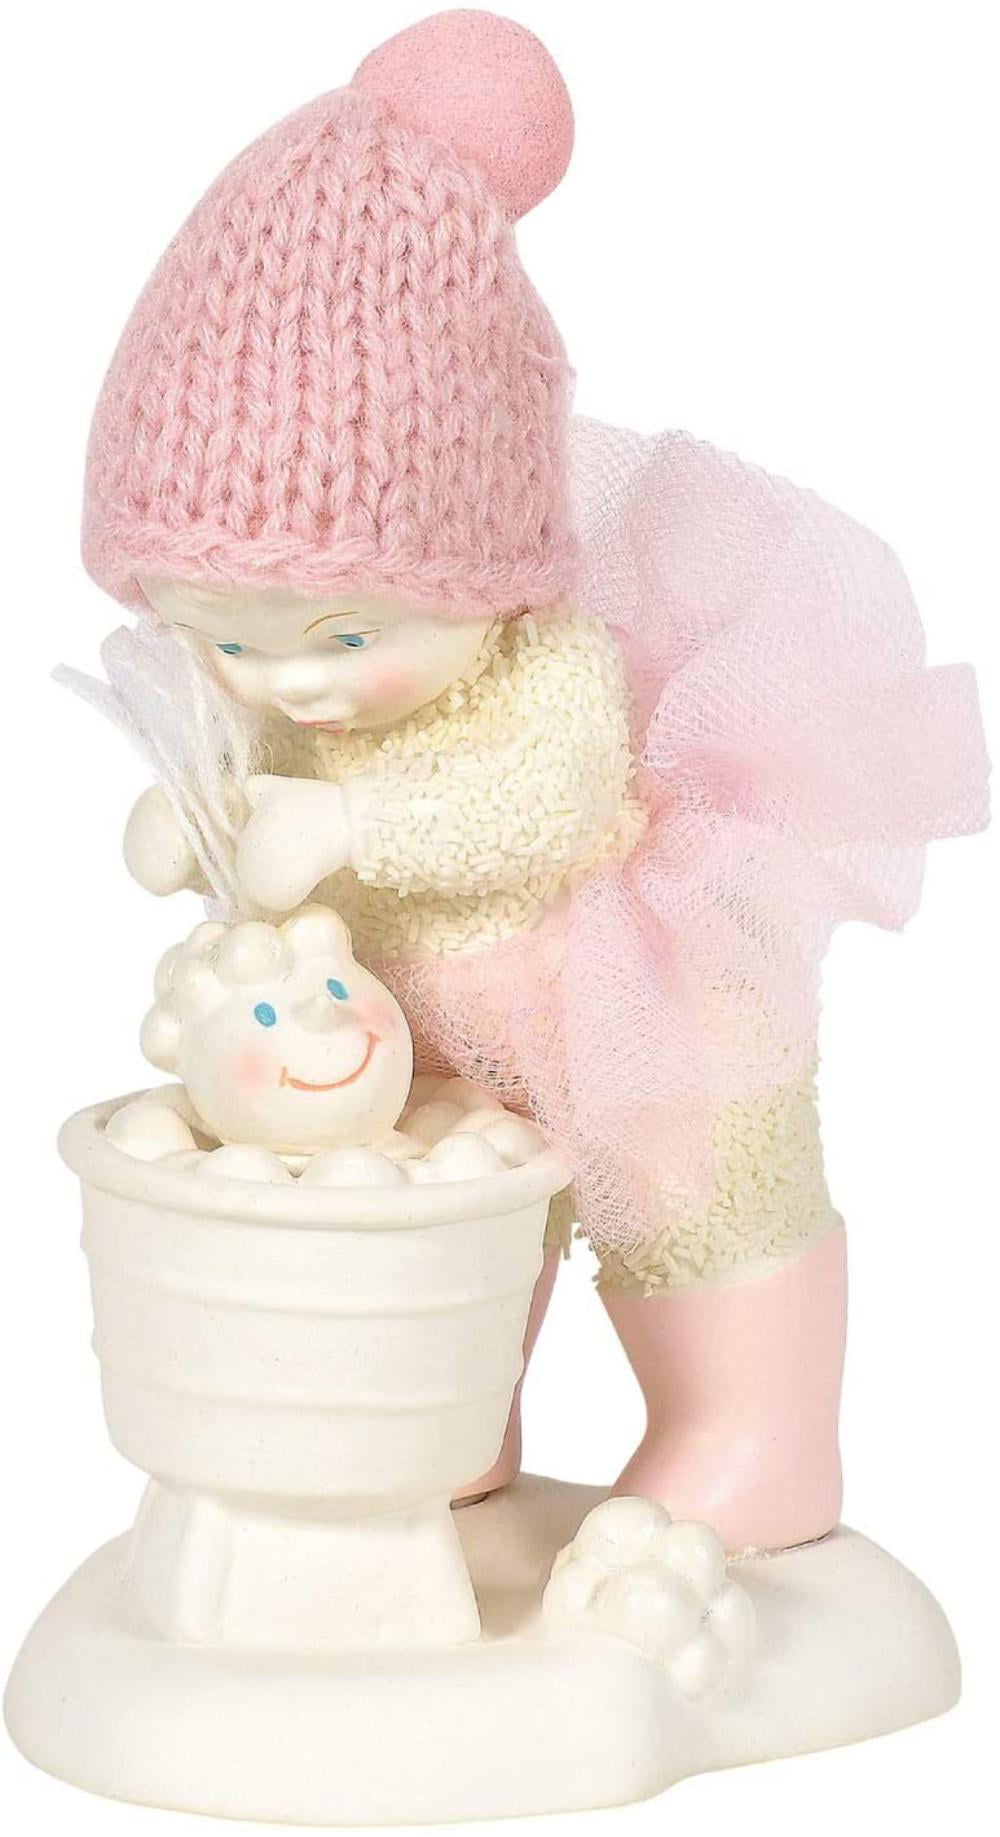 5.5 Inch Department 56 Snowbabies Classics Youre The Star in My Sky Figurine Multicolor